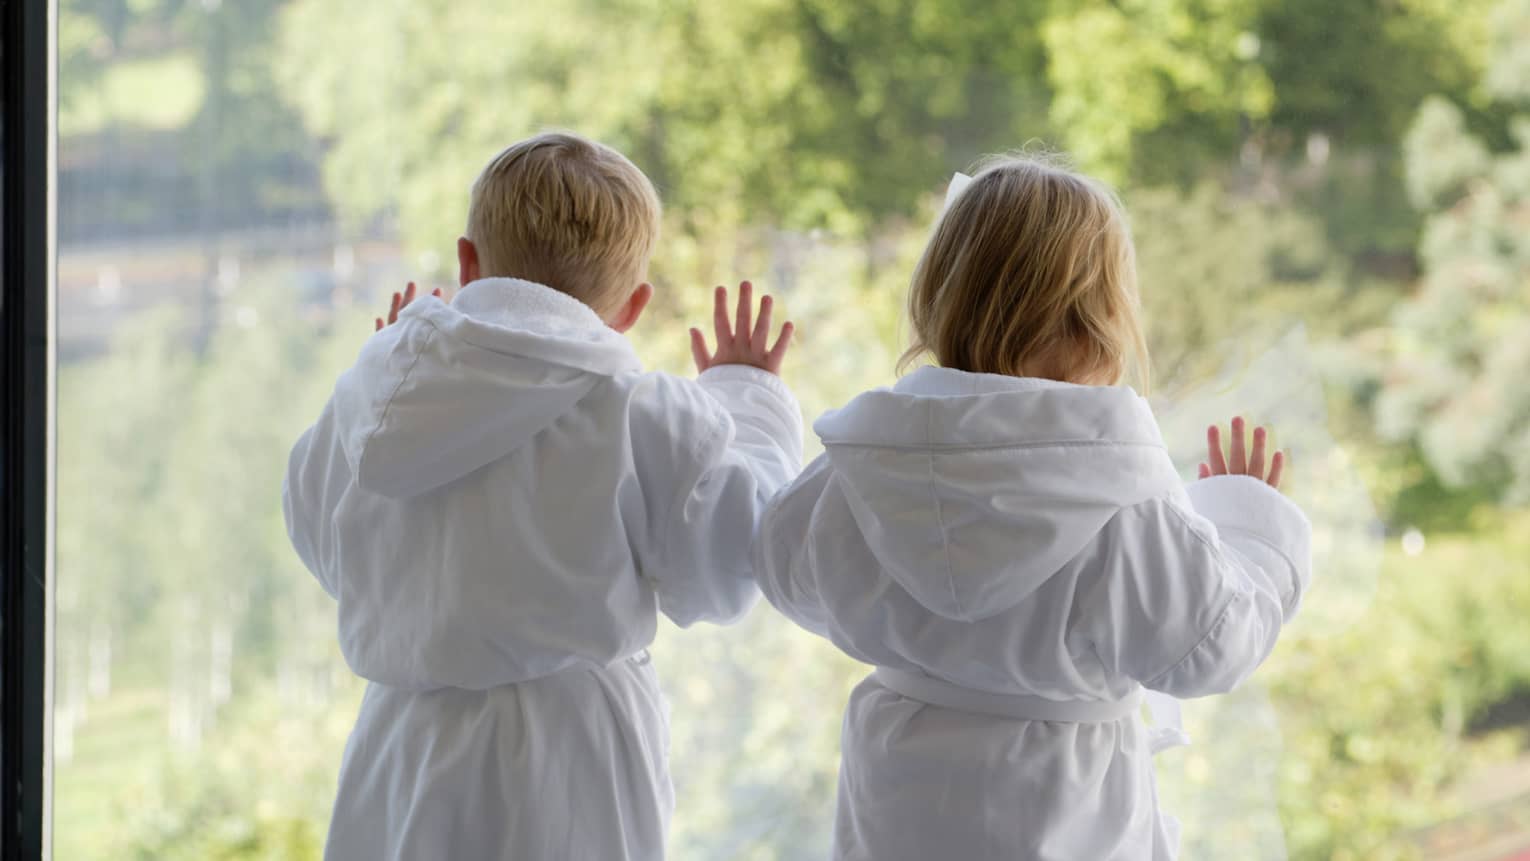 Two young children wearing white bathrobes gaze out floor-to-ceiling window overlooking trees